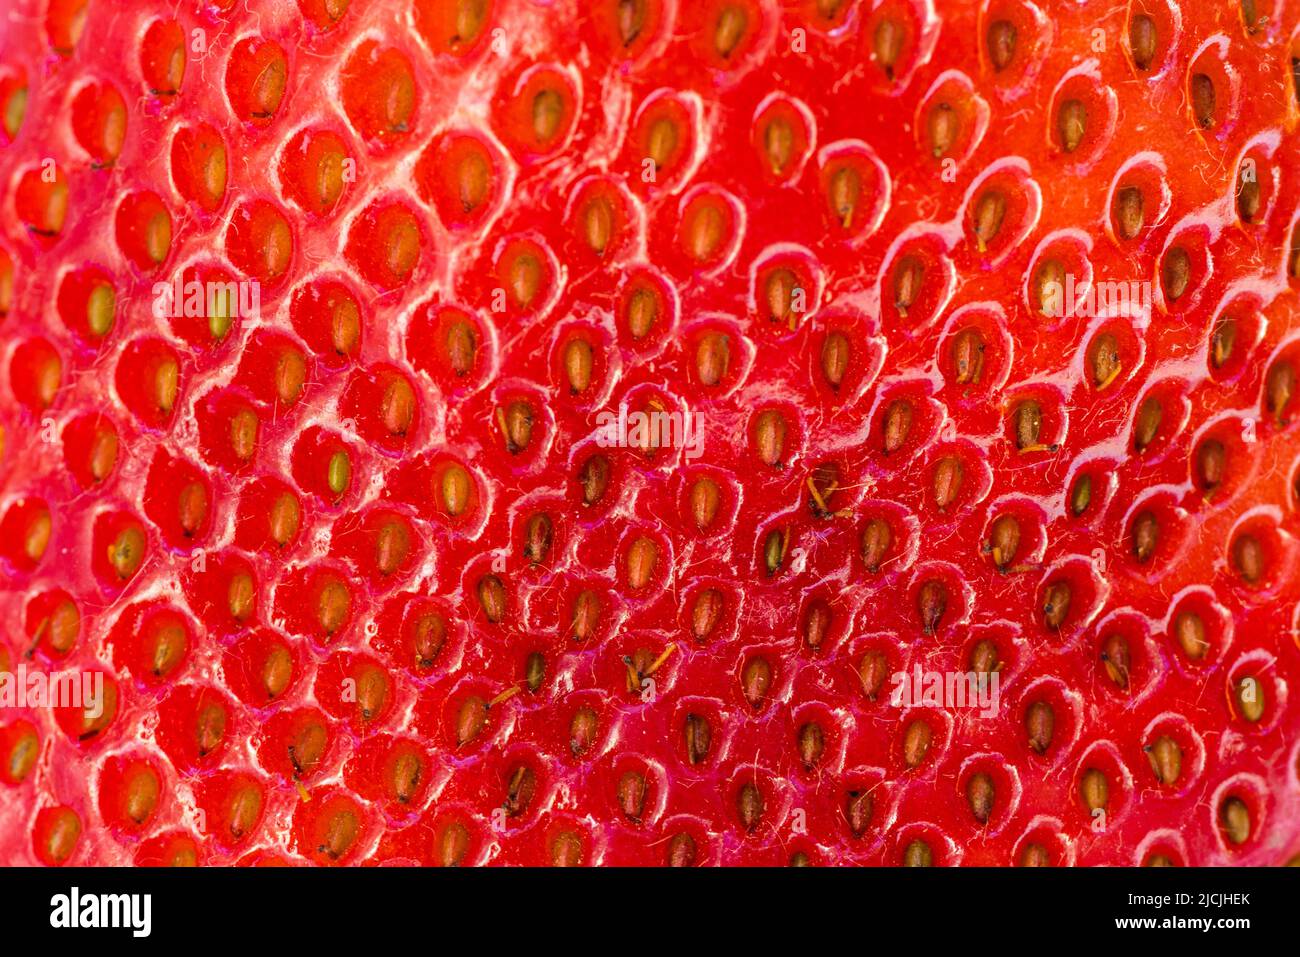 close up of a rest red ripe strawberry with golden seeds and amazing texture Stock Photo